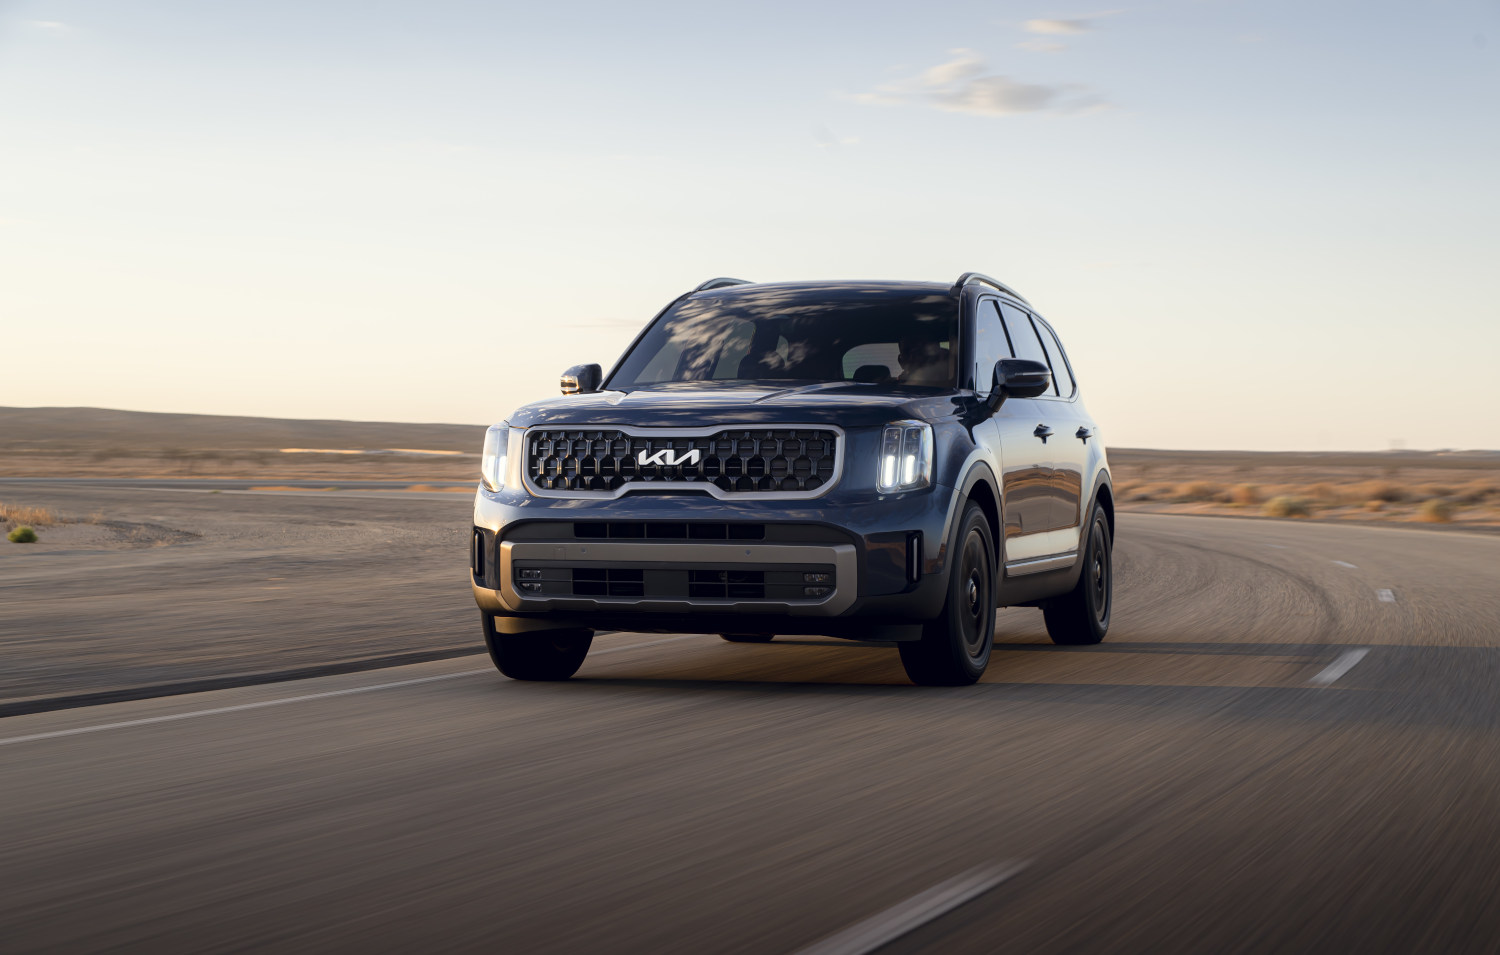 This 2023 Kia Telluride is one of the most reliable SUVs